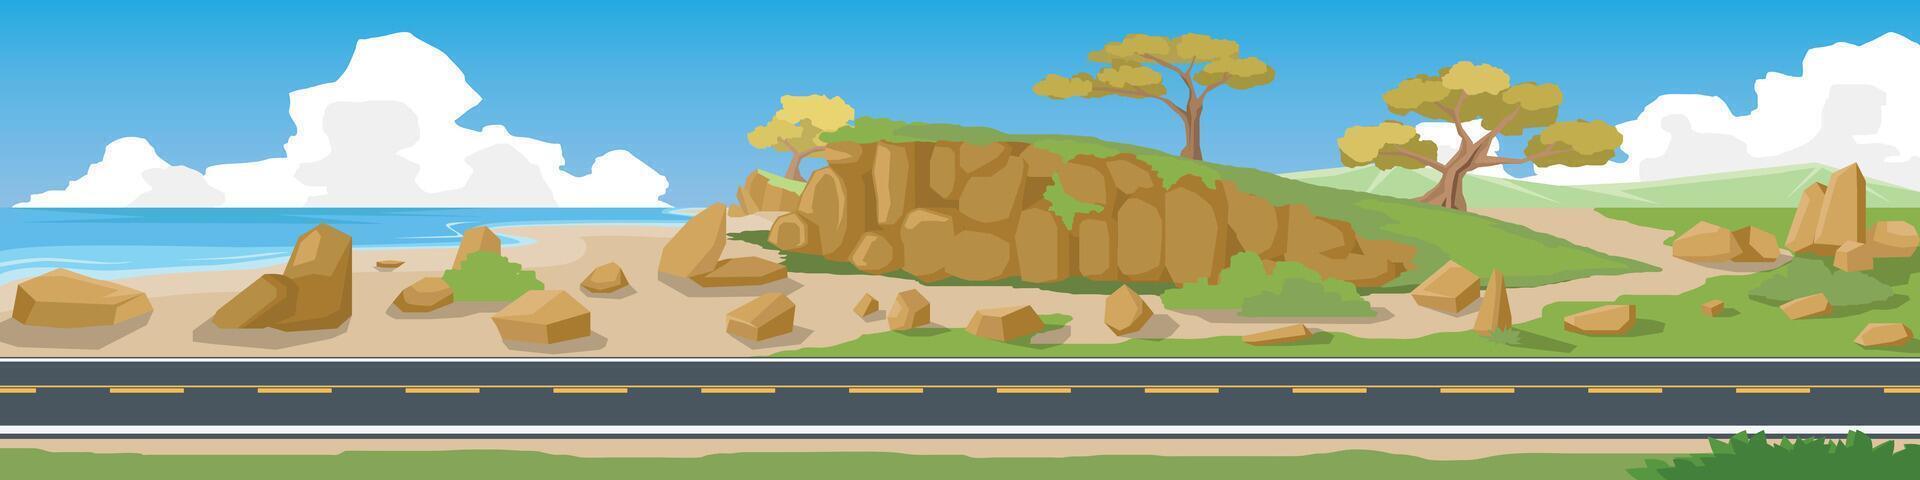 Horizontal view of Asphalt road. Coastal area lined with hills and rocks. background of mountain under blue sky and white clouds. vector